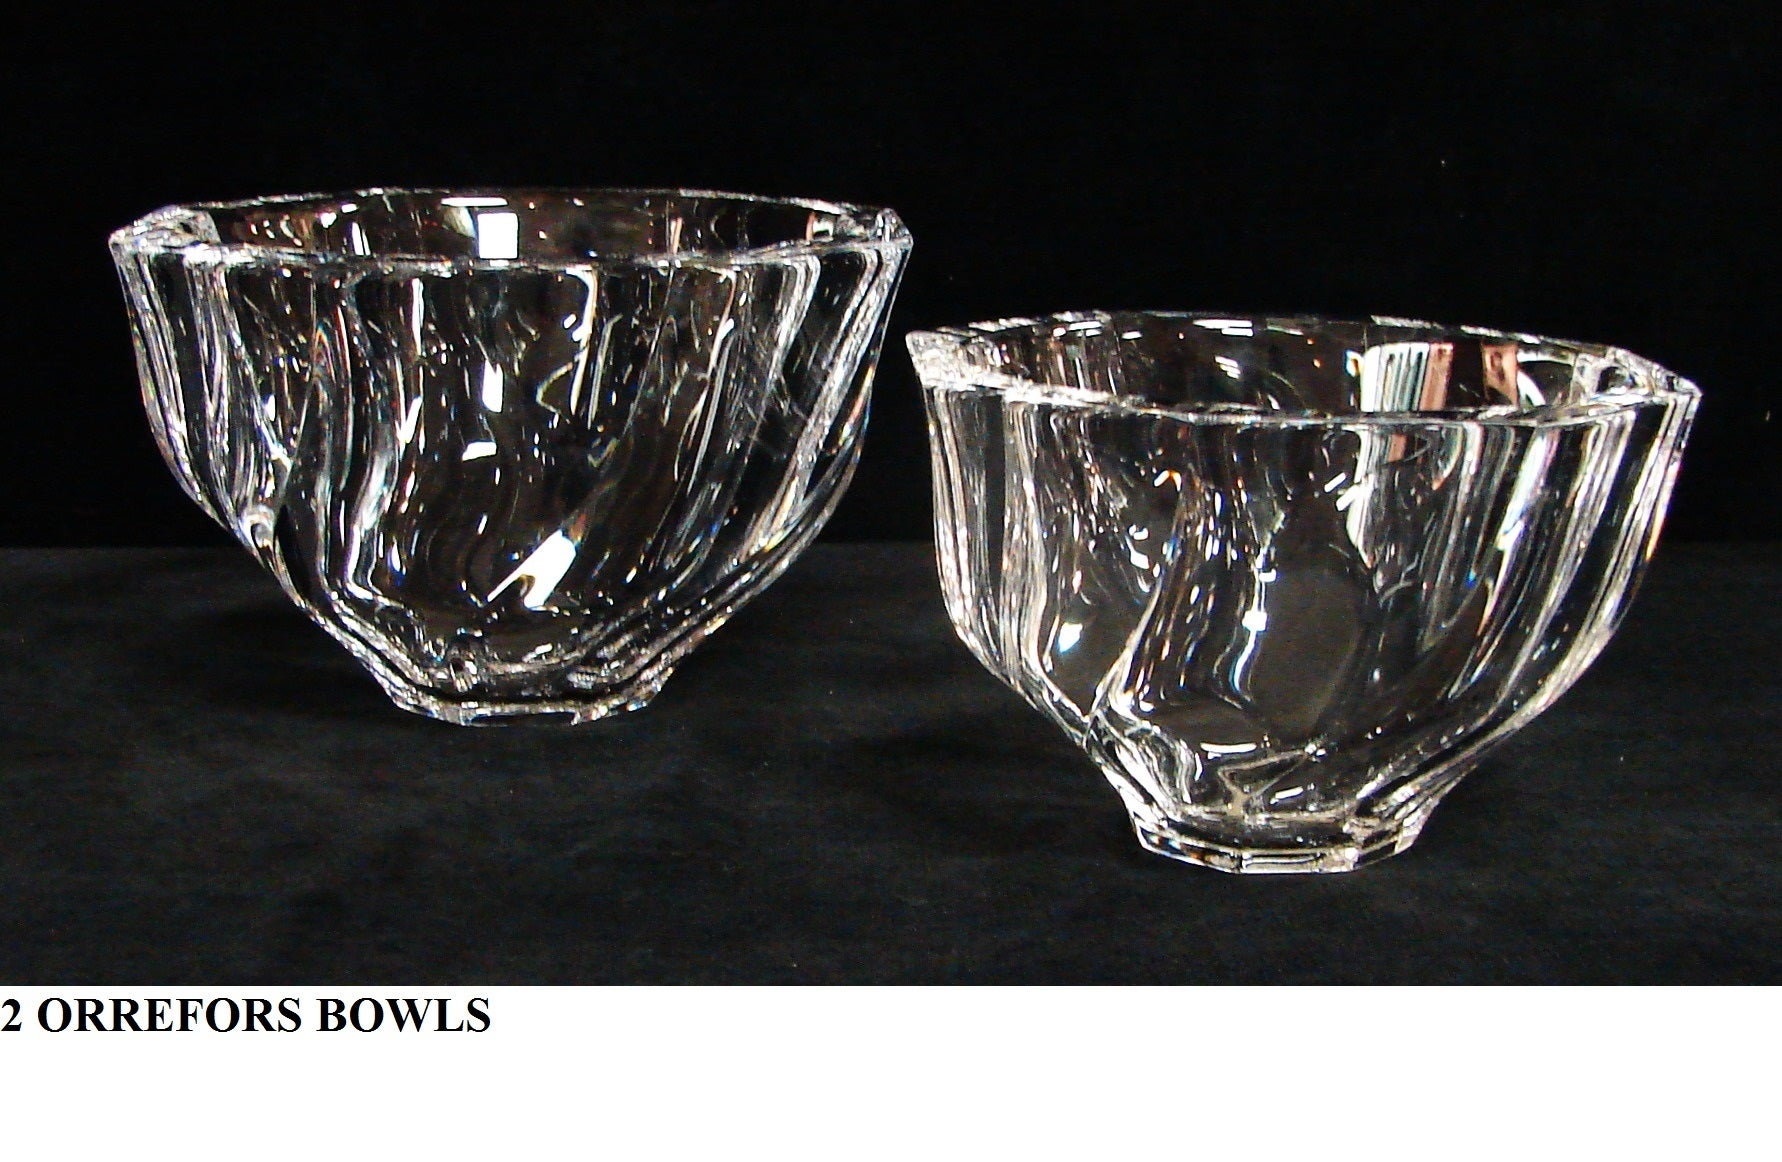 Two Orrefors Lead Crystal Bowls by Olle Alberius